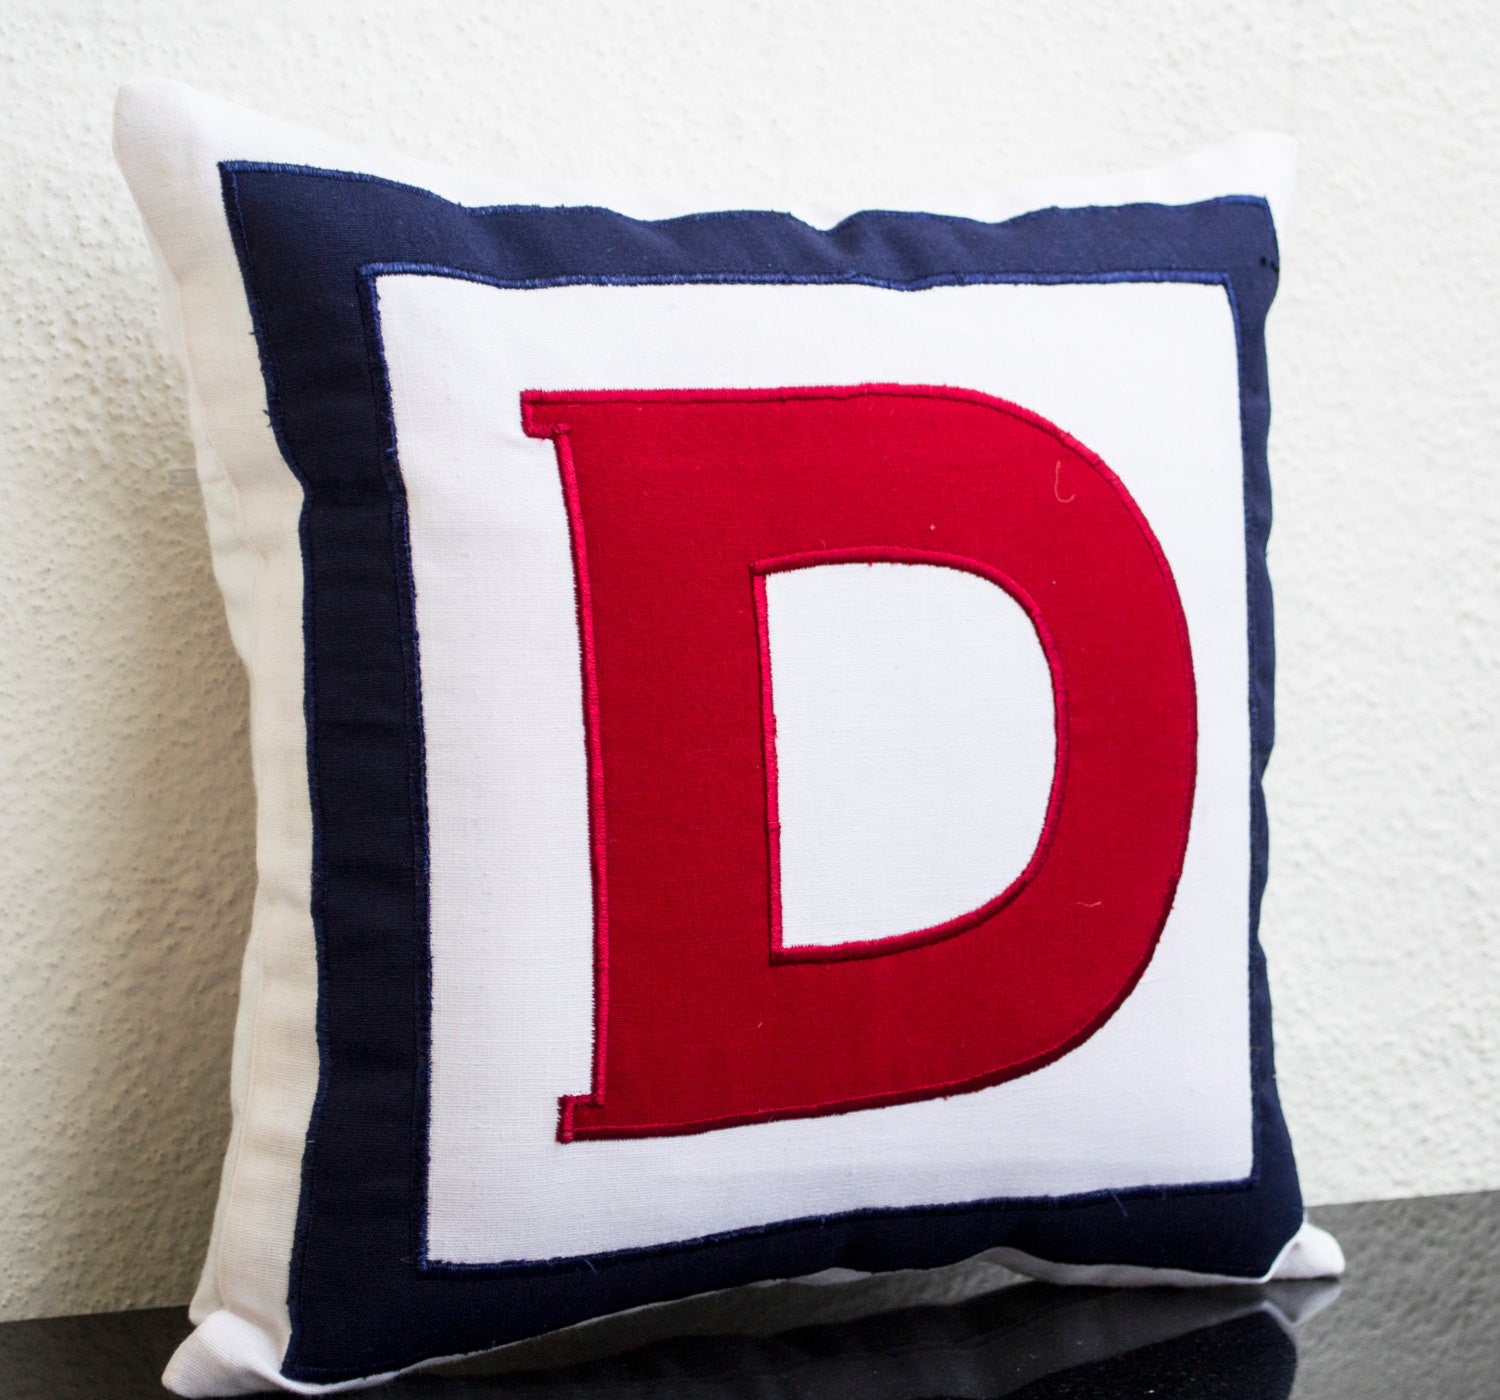 Monogrammed throw pillows in multiple colors